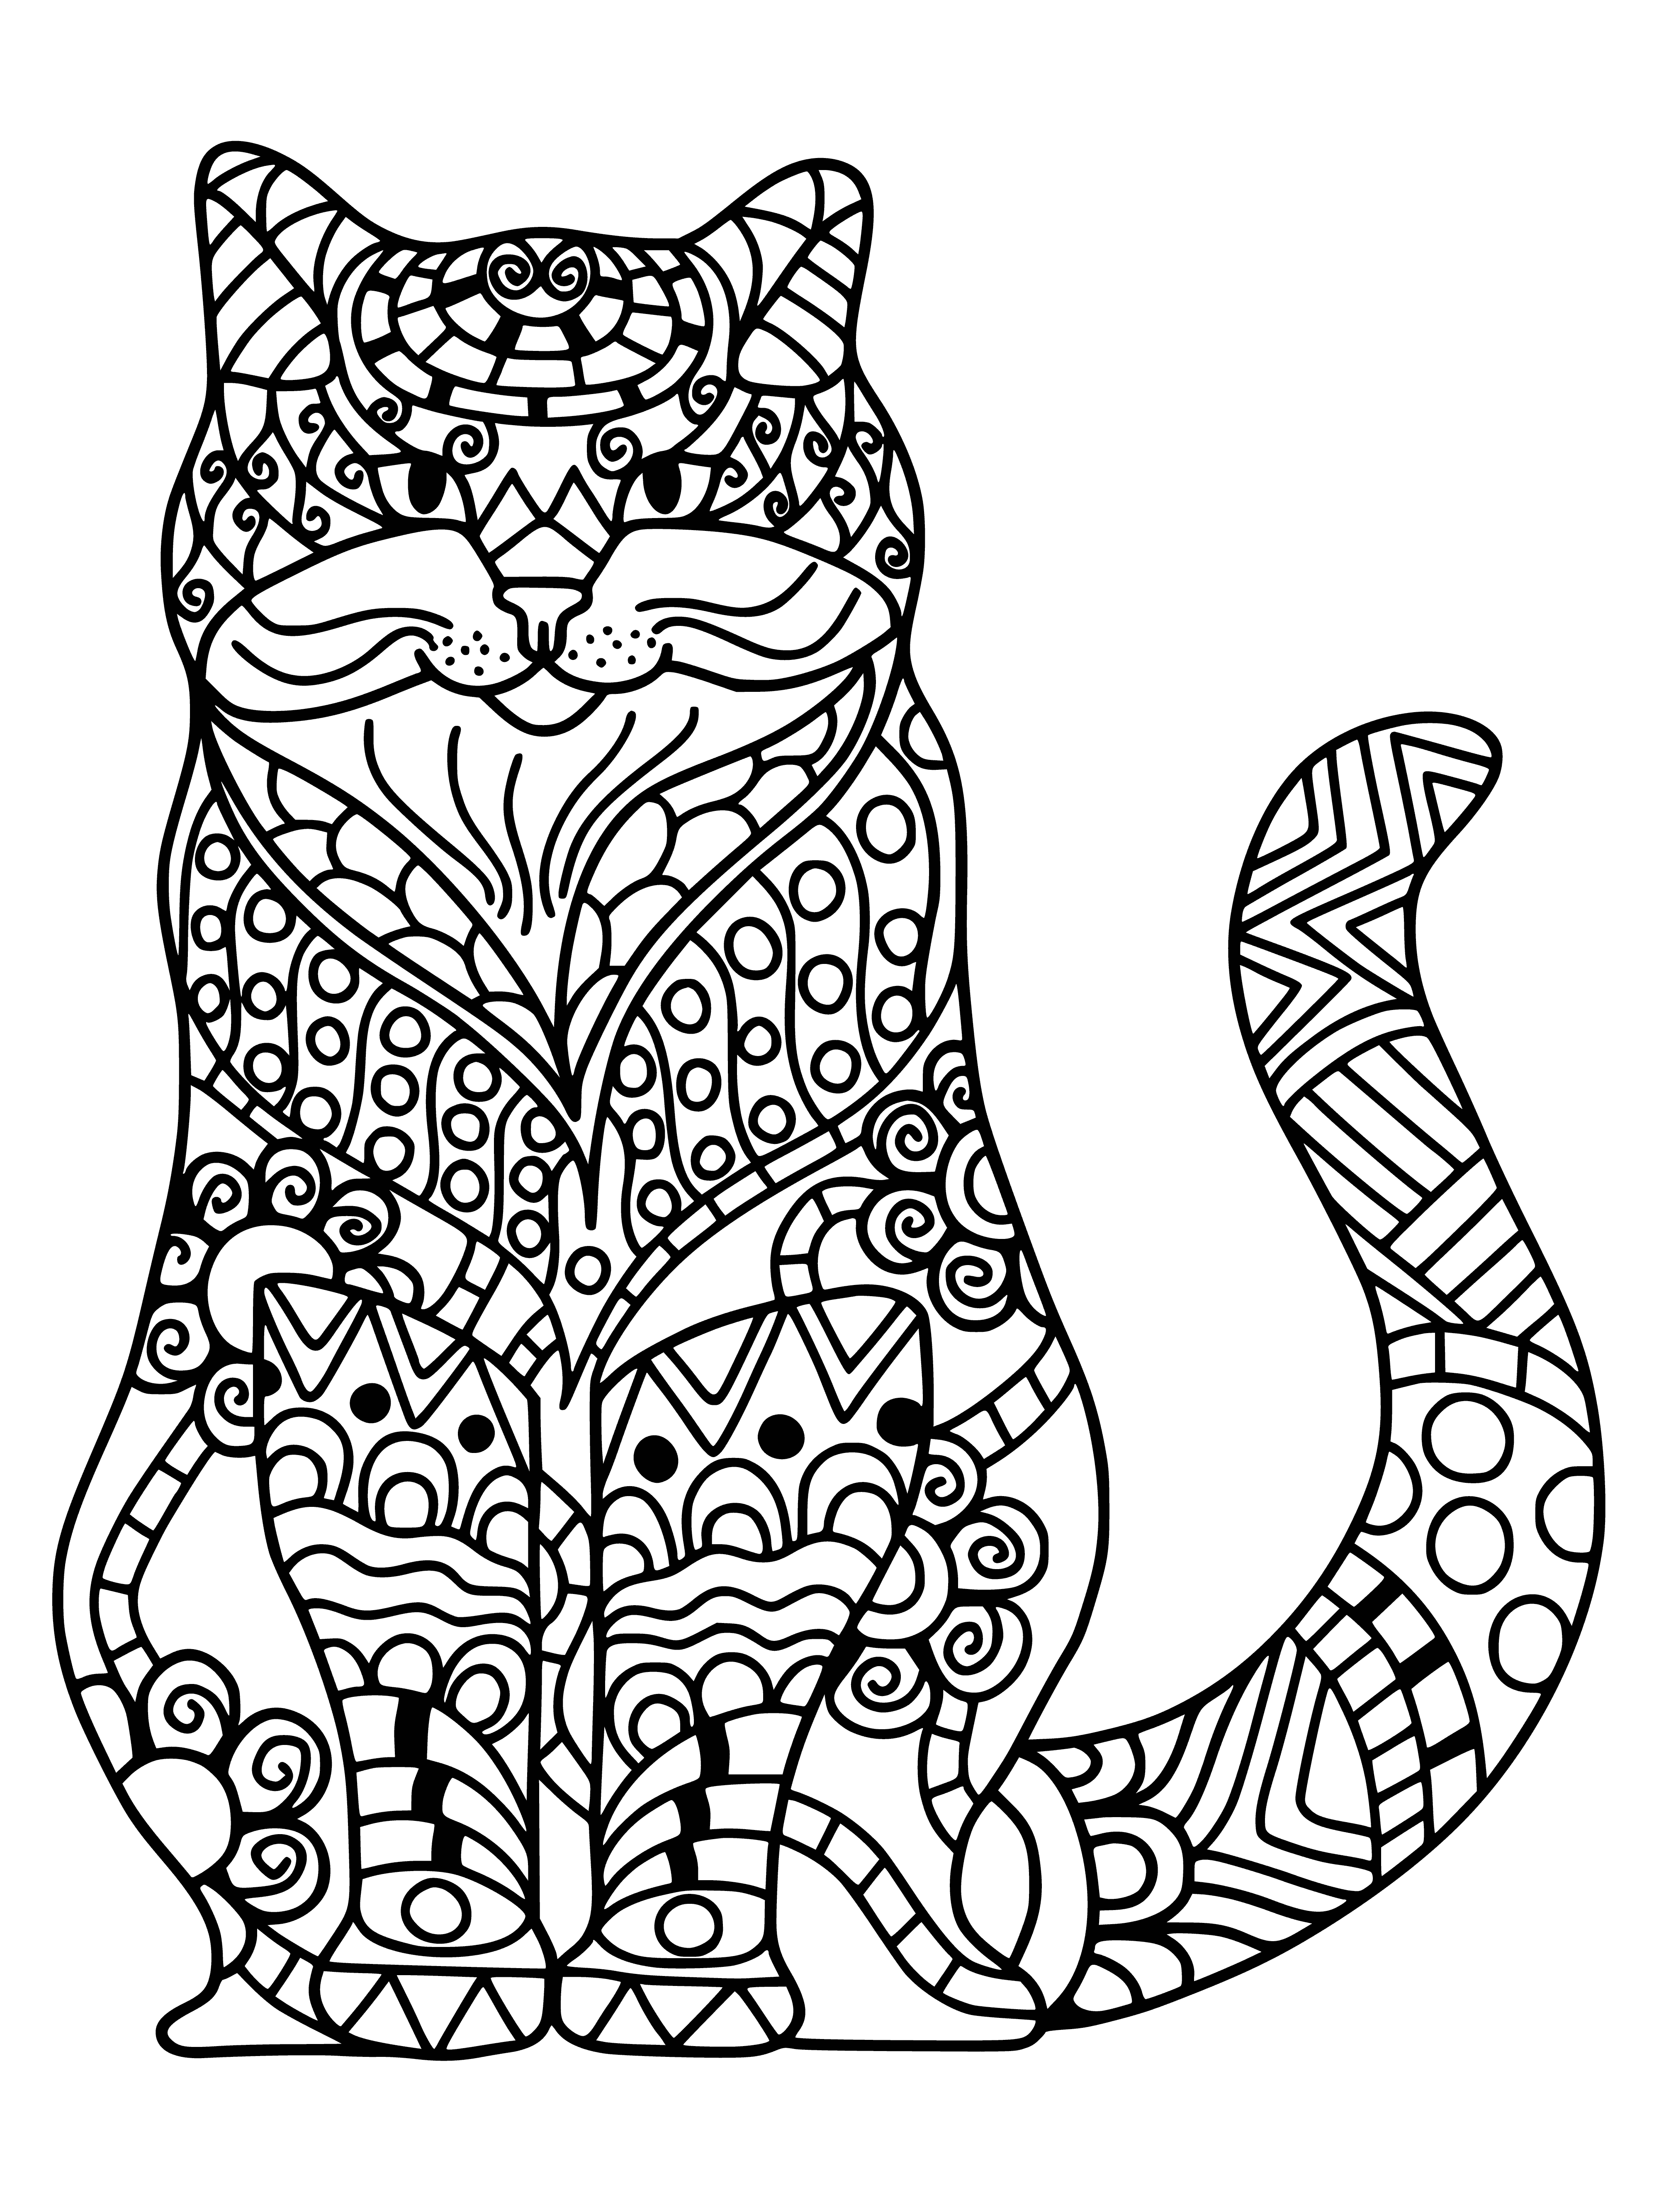 coloring page: 2 cats in coloring page: 1 lying, 1 standing looking, both w/ blue eyes. Lying cat has yellow collar w/ bell, standing cat green collar. #cats